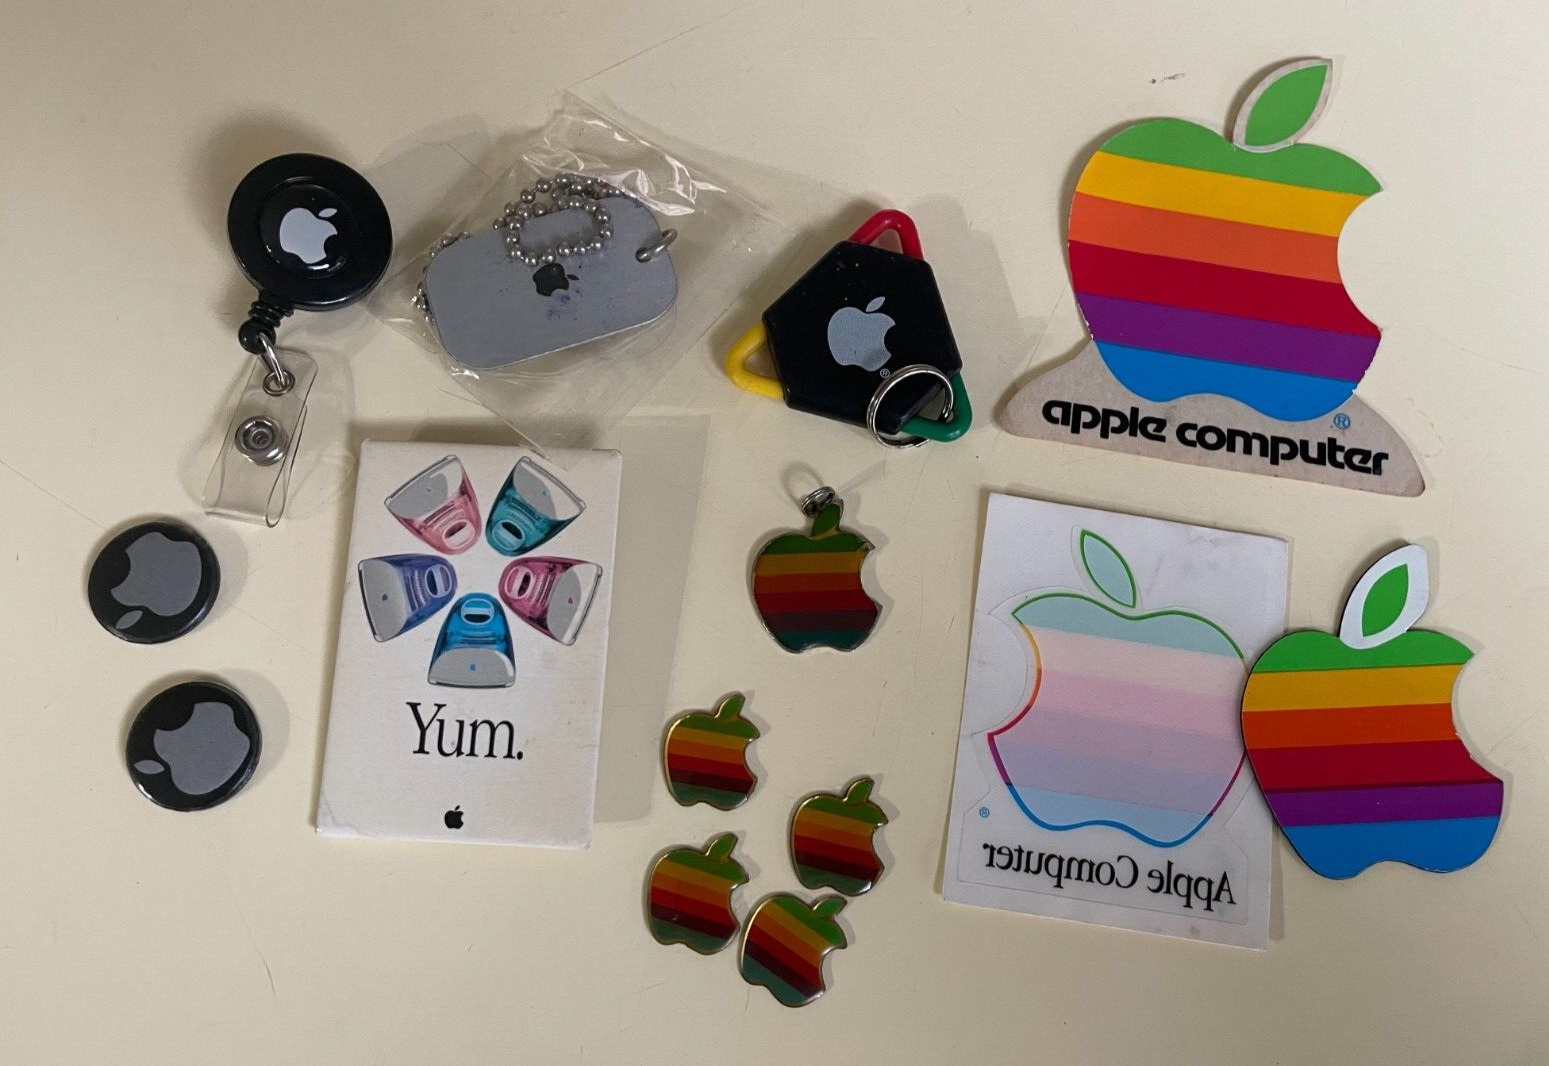 APPLE COMPUTERS VINTAGE EMPLOYEE LOT OF STUFF - 14 ITEMS IN TOTAL